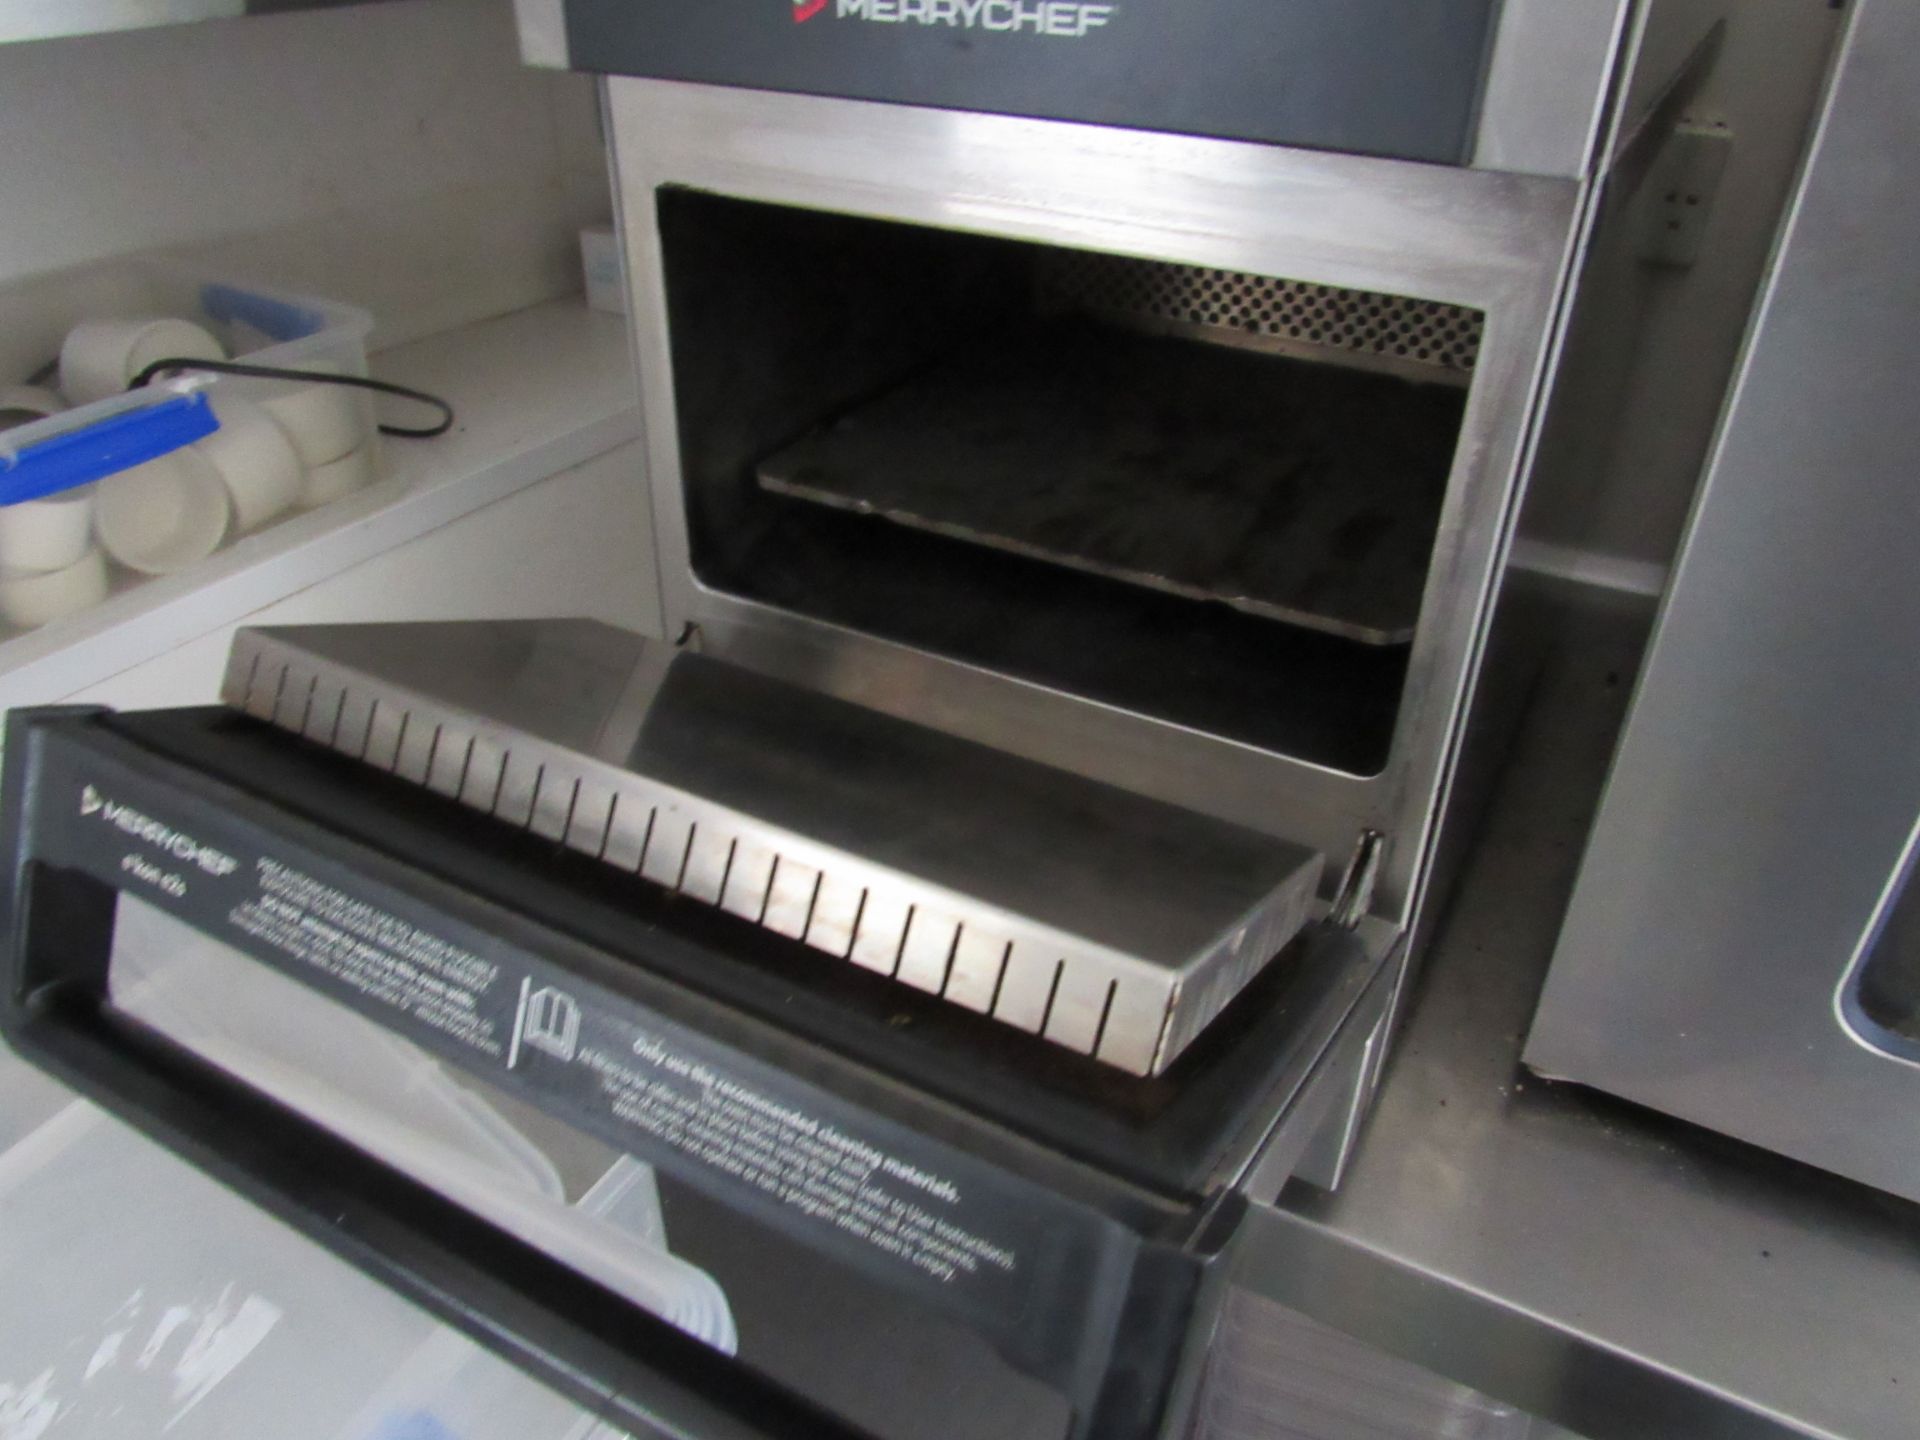 Merrychef Eikon E2S SP 1kW High Speed Oven Single Phase, 2.2kW Convection/1kW Microwave | - Image 3 of 4